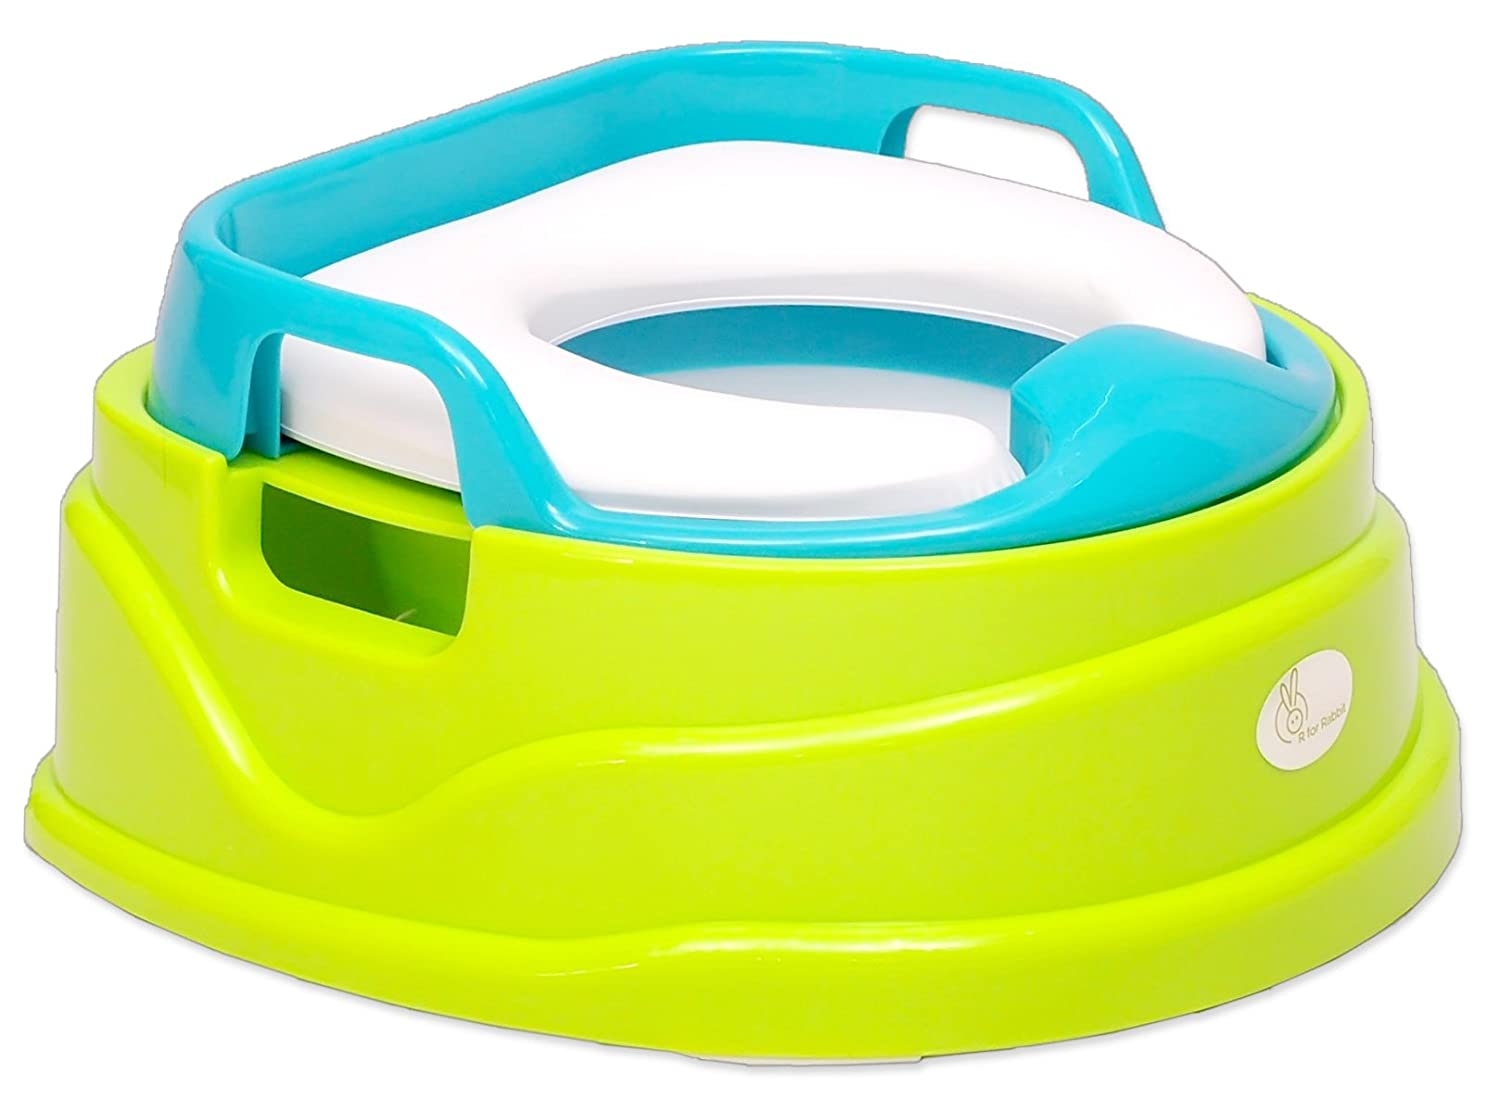 Mothercare | R For Rabbit Ding Dong Baby Potty Seat & Chair Green Blue